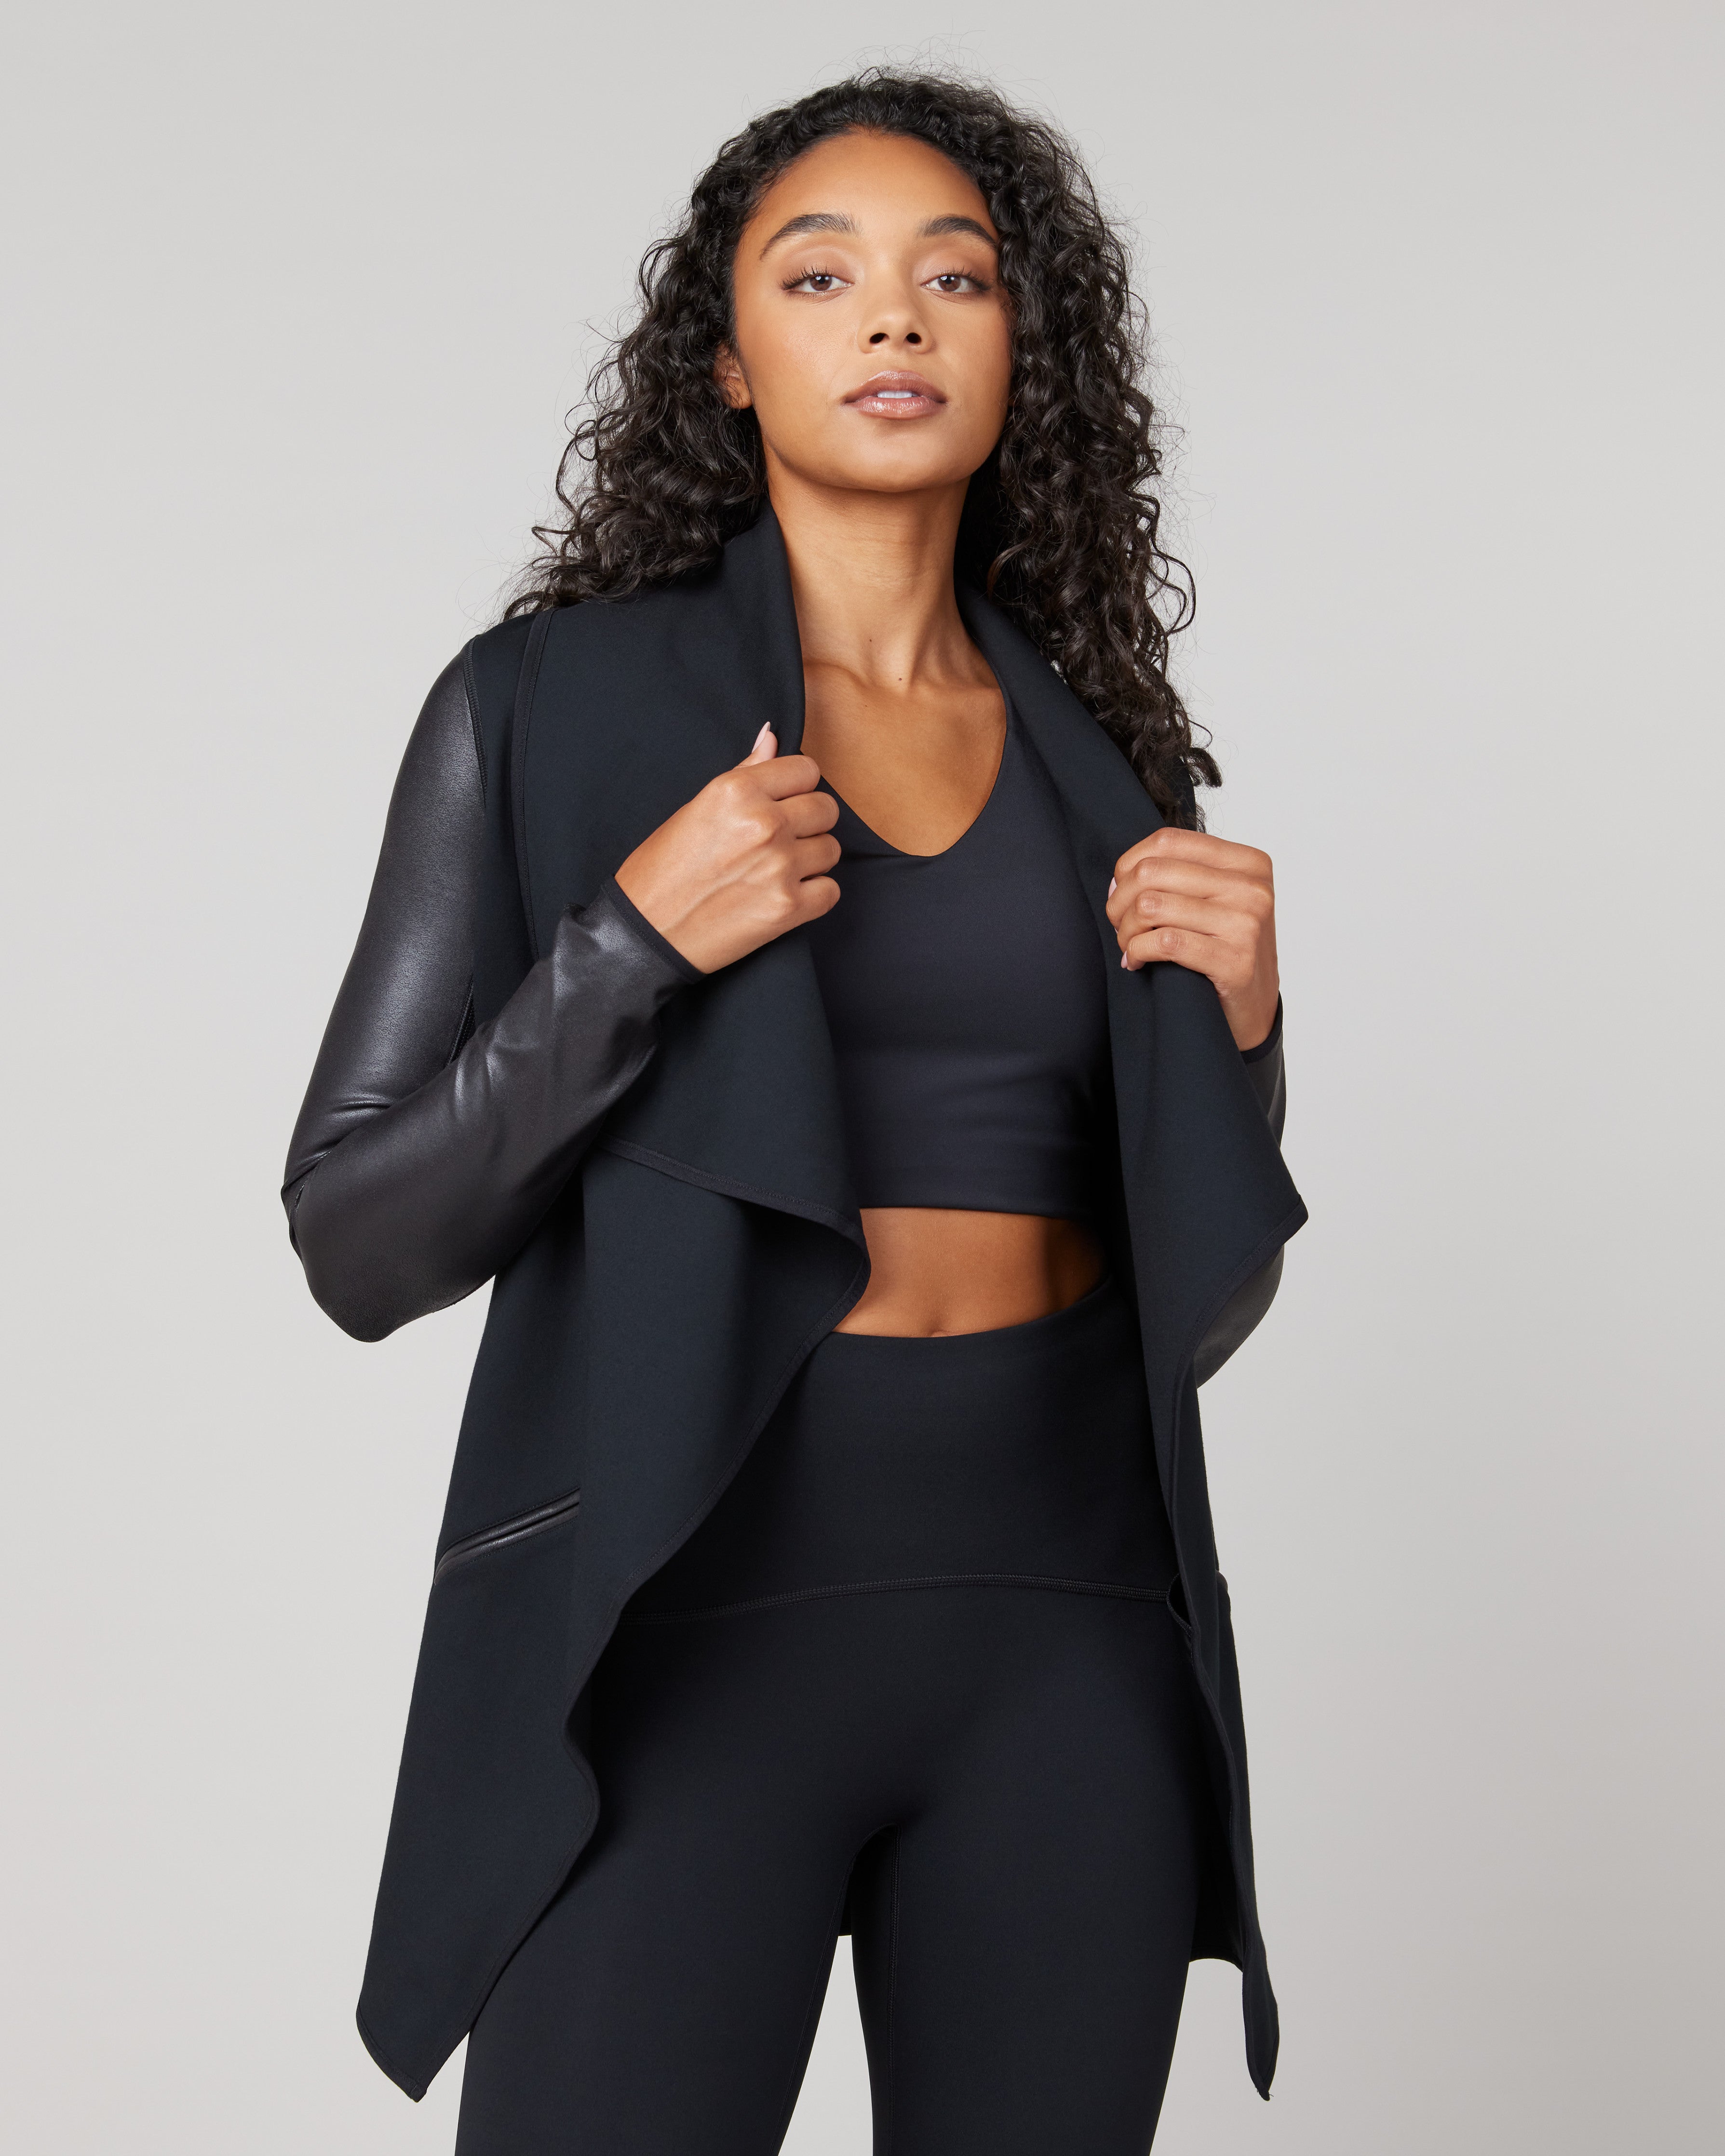 SPANX - Soyou agree? You think this jacket is really pretty? 😉 This  goes-with-everything Drape Front Jacket is buttery-soft, versatile, keeps  you cozy, and yes it's really pretty. Plus you can style